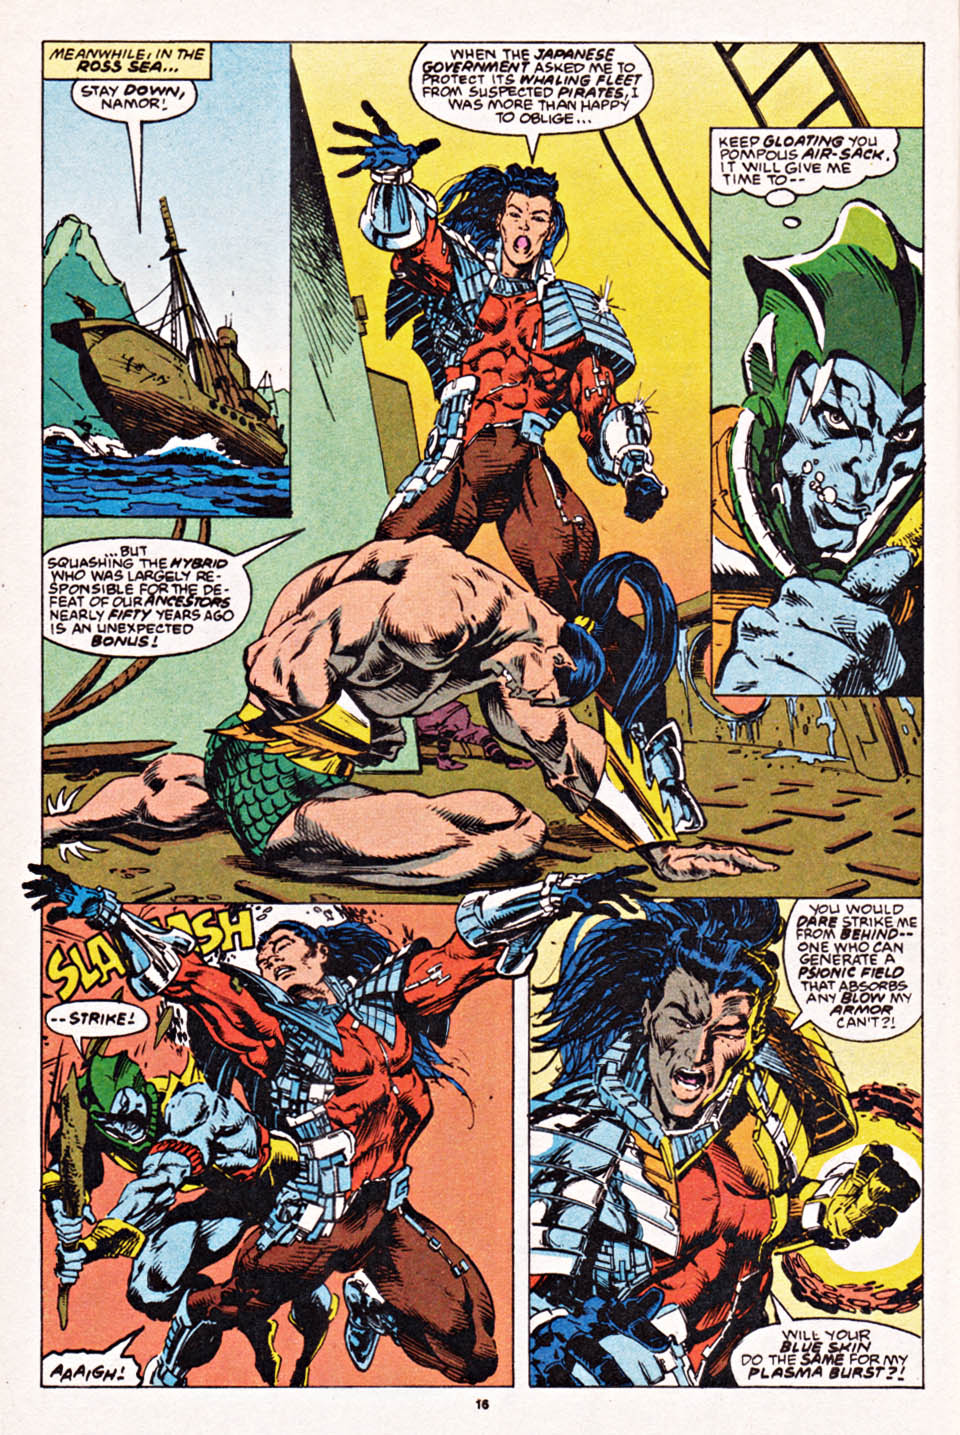 Read online Namor, The Sub-Mariner comic -  Issue #45 - 13